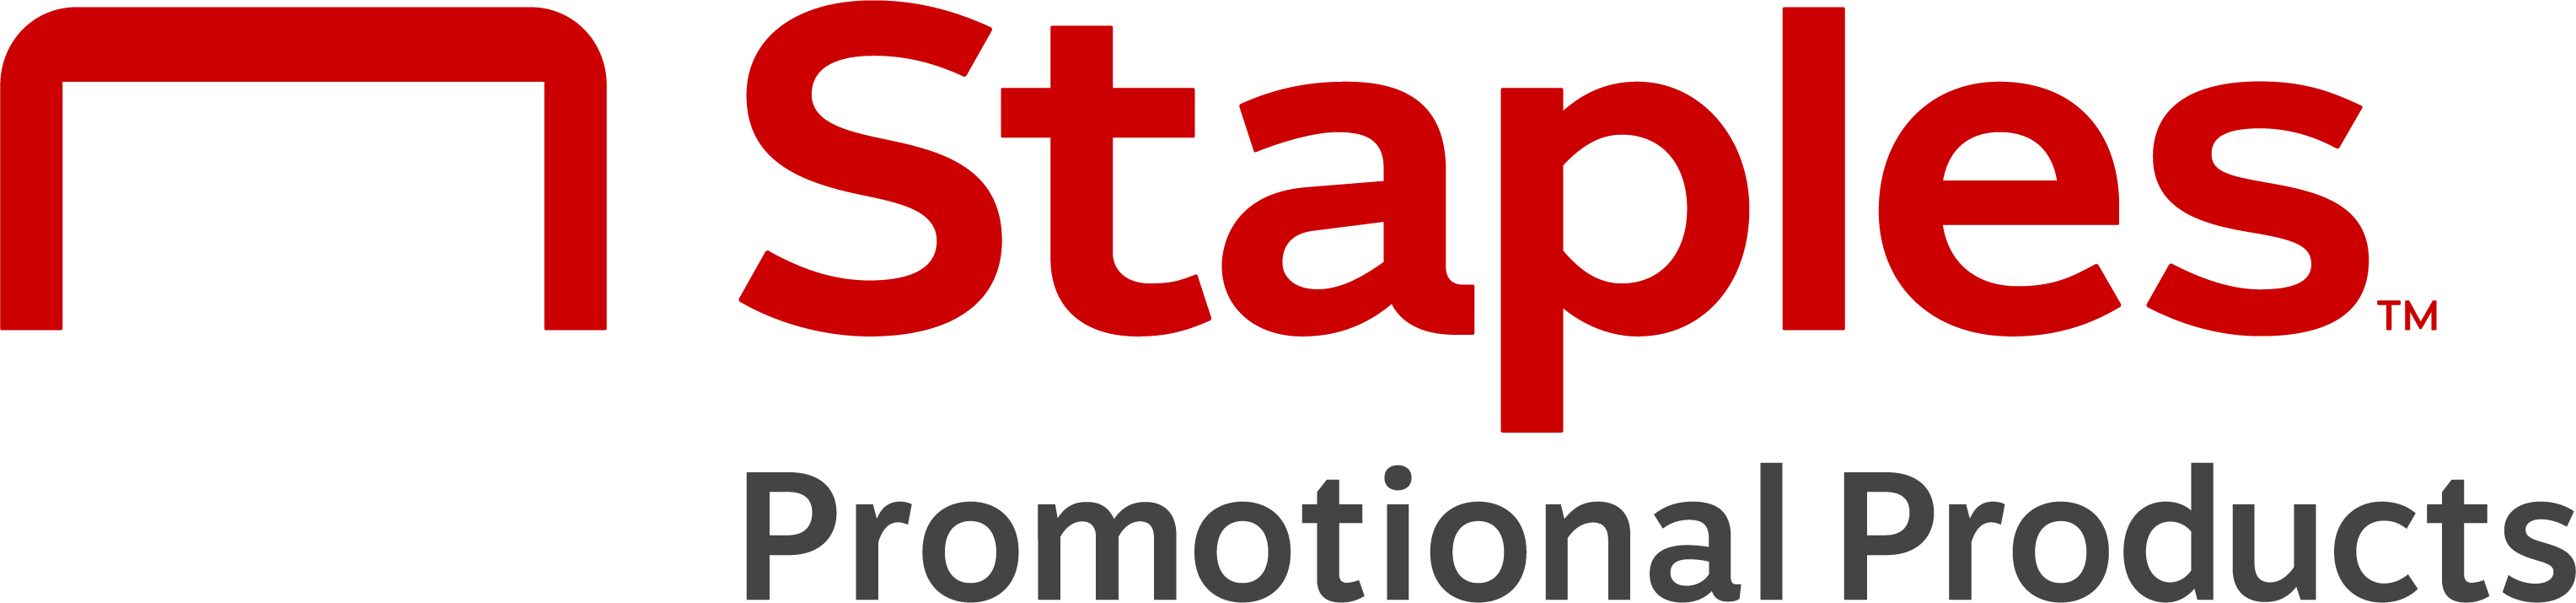 Staples Promotional Products Logo